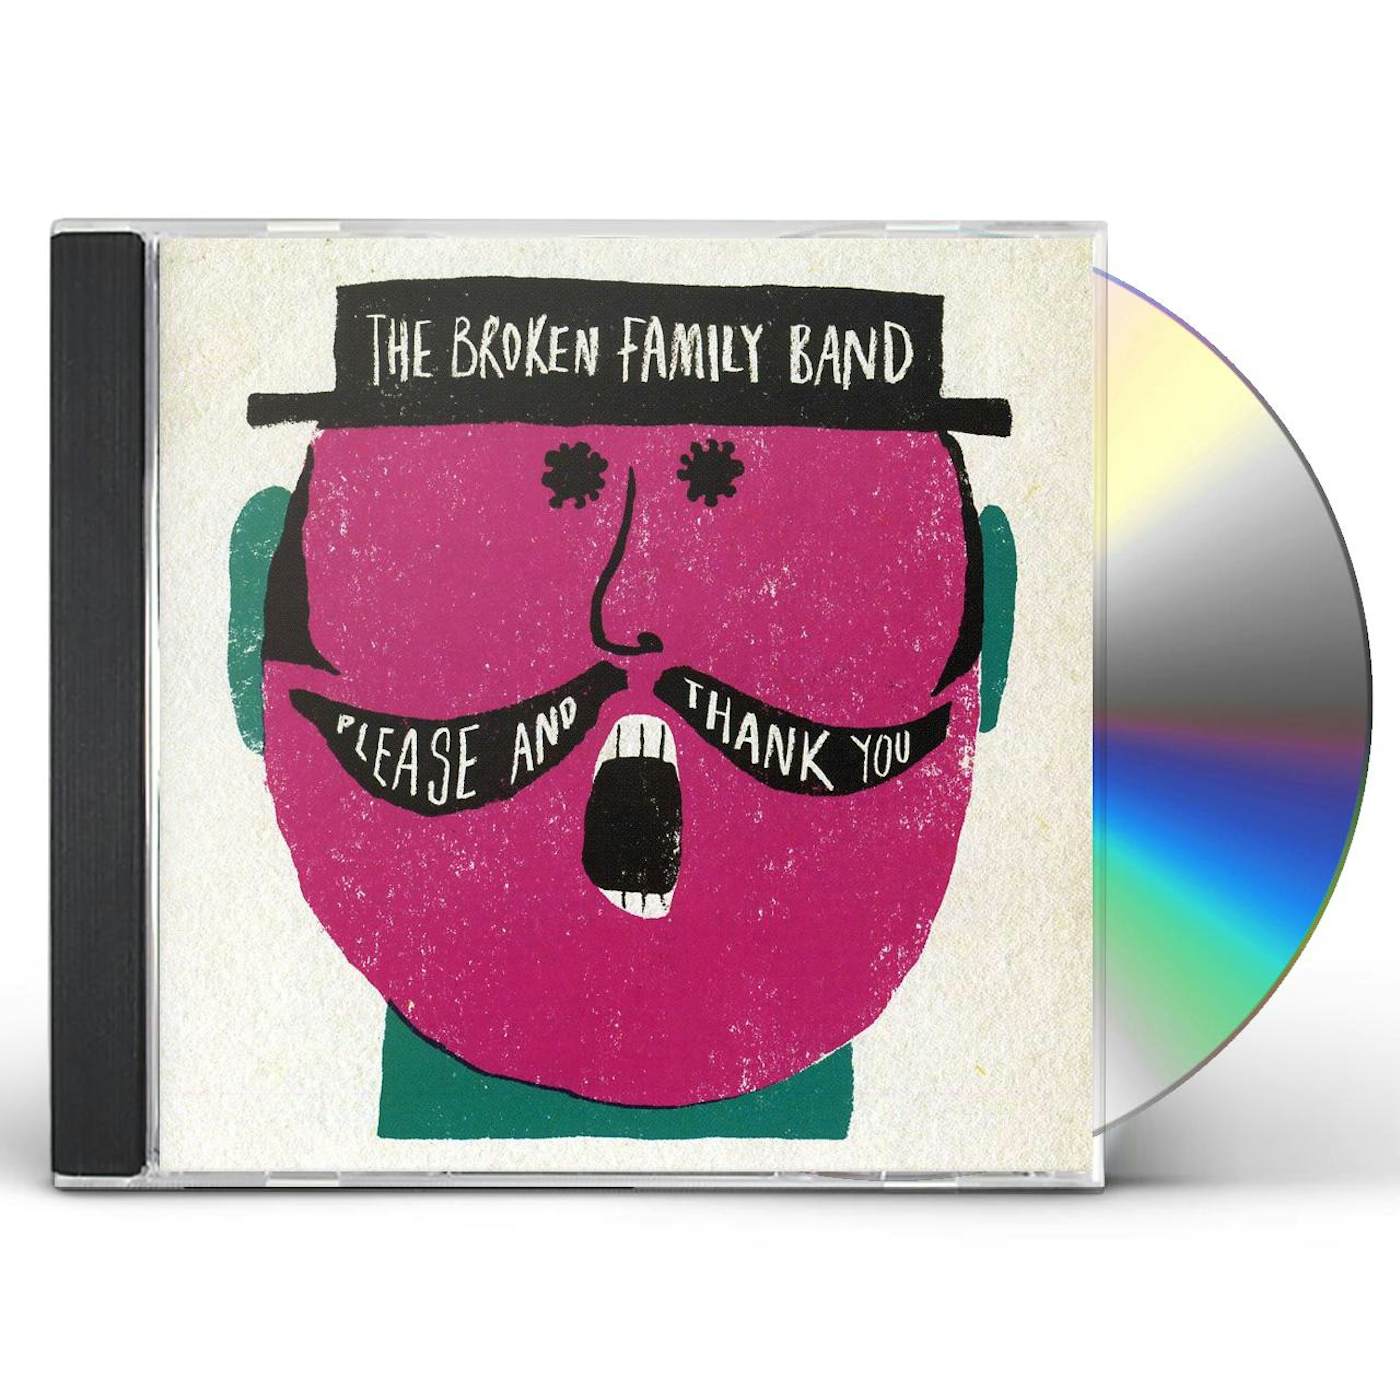 The Broken Family Band PLEASE & THANK YOU CD